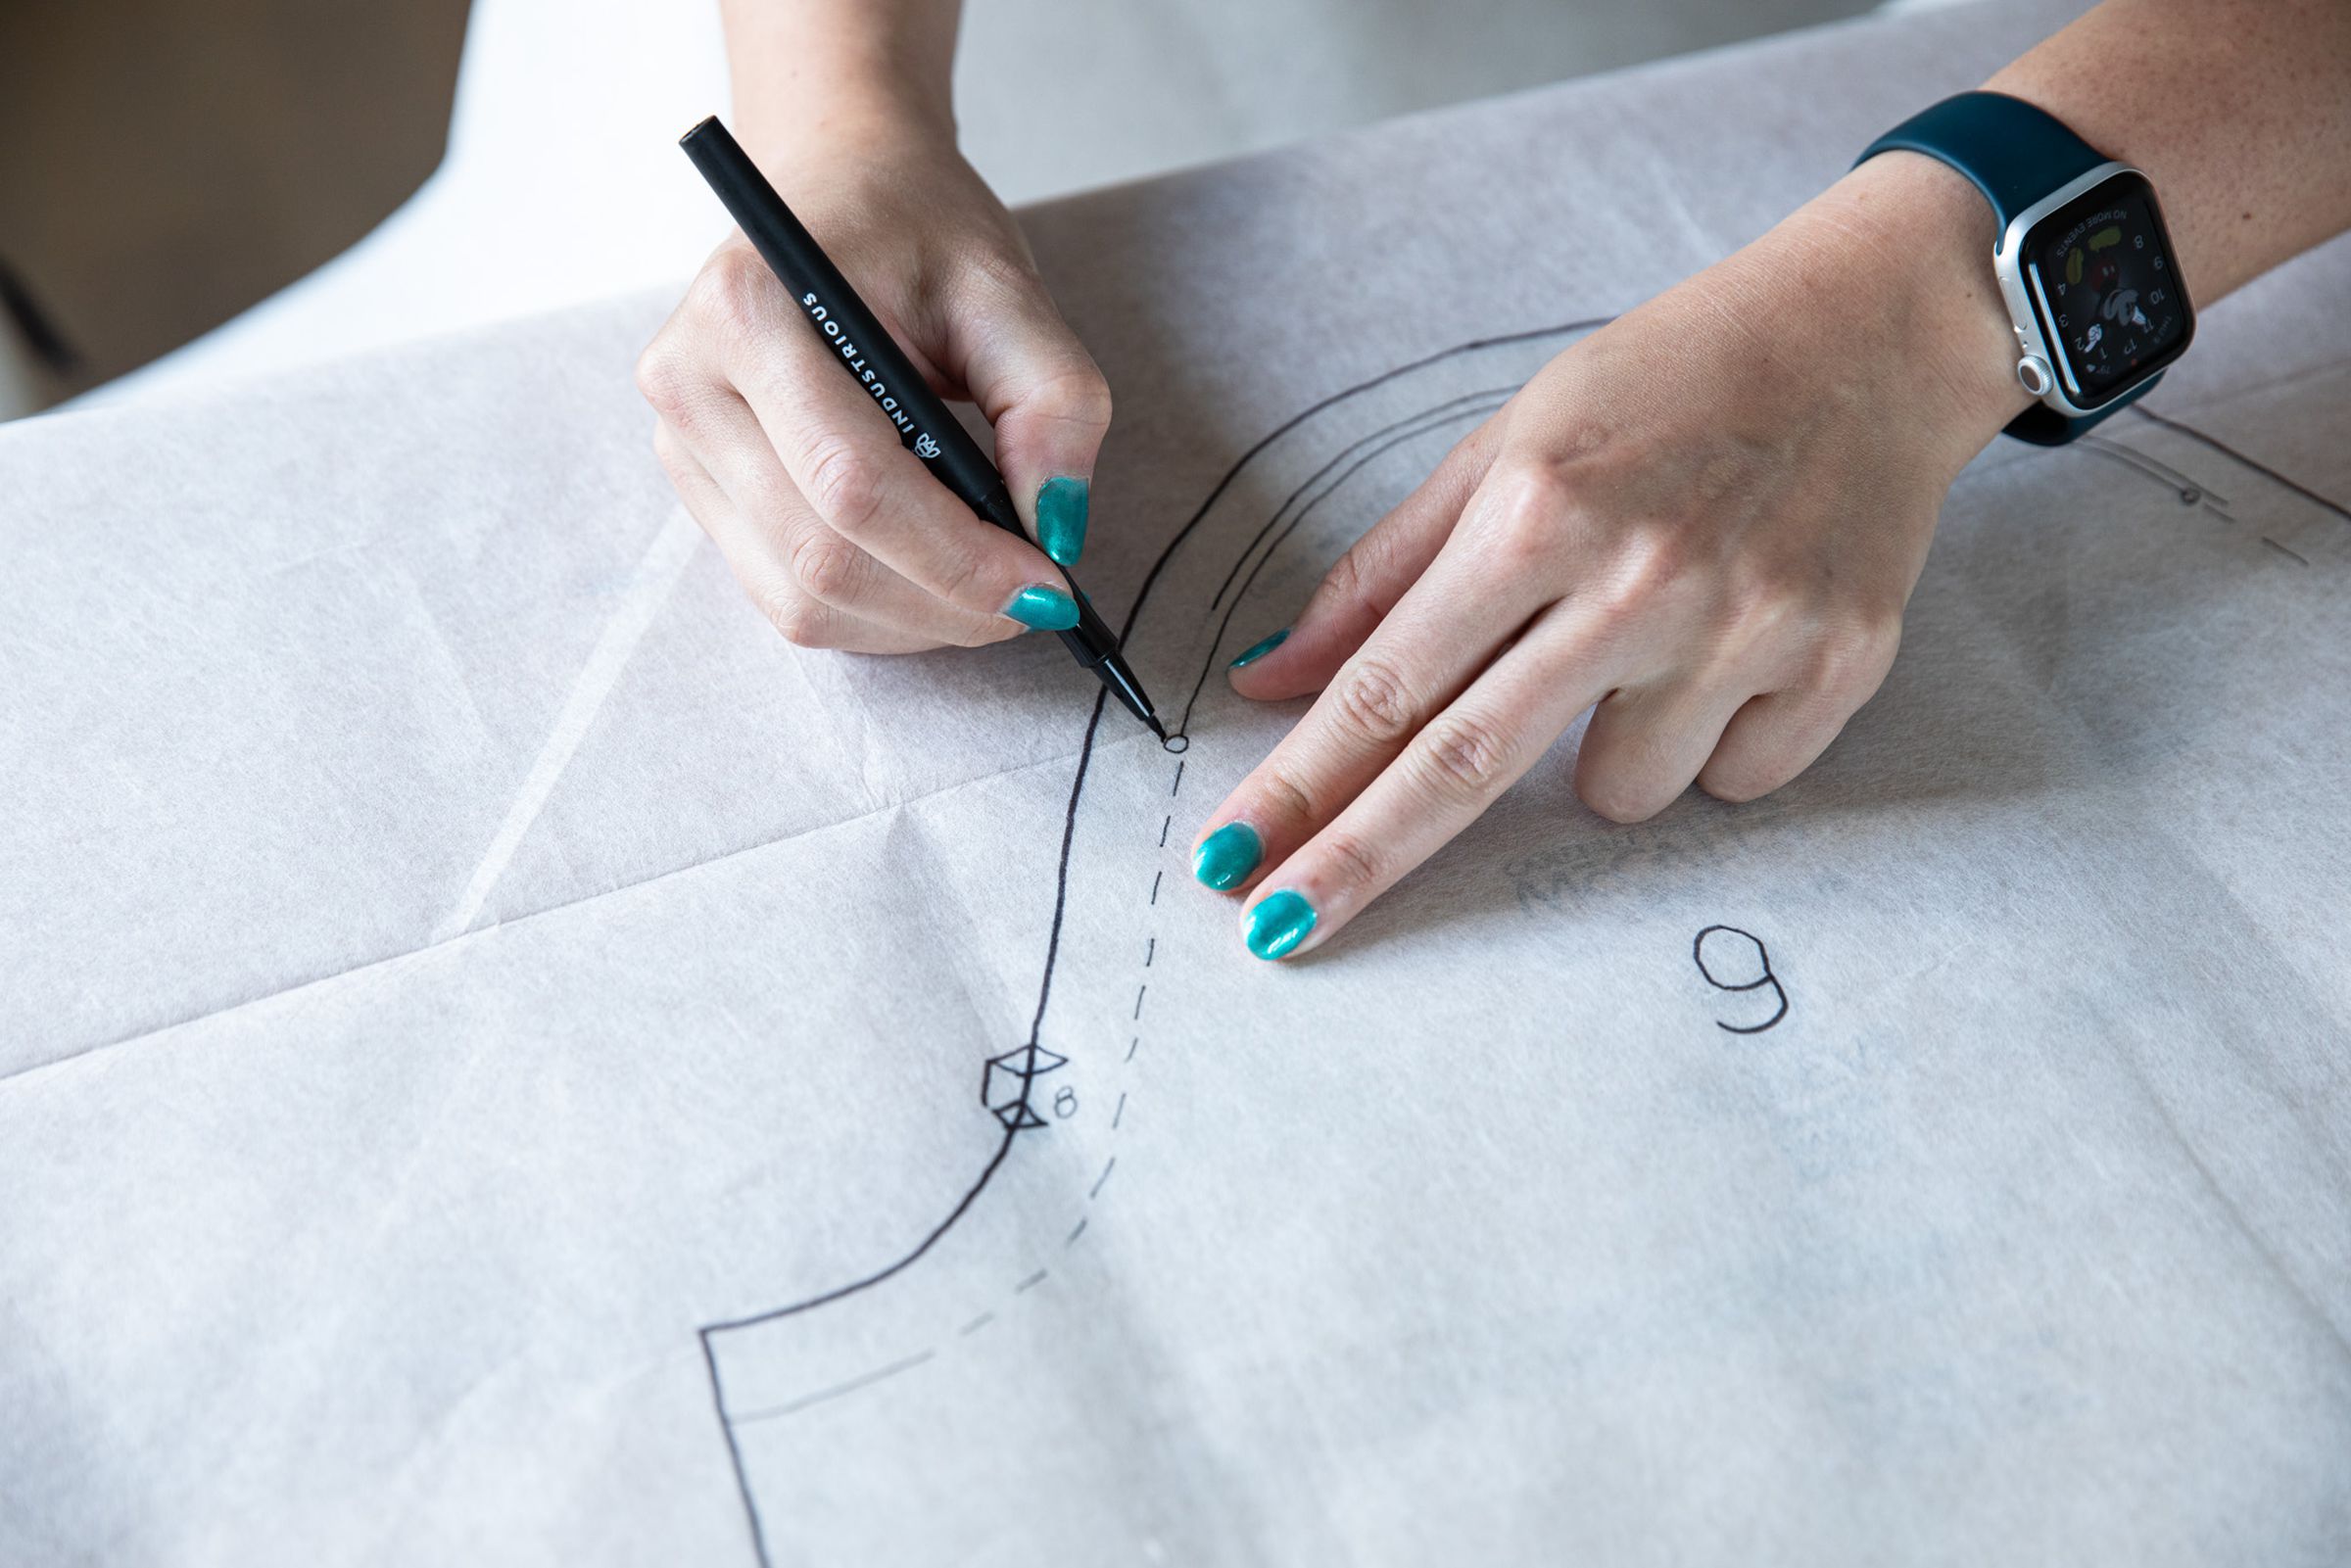 Verge reporter Mia Sato works on a dress from a vintage pattern at a makeshift sewing station — her dining room table.